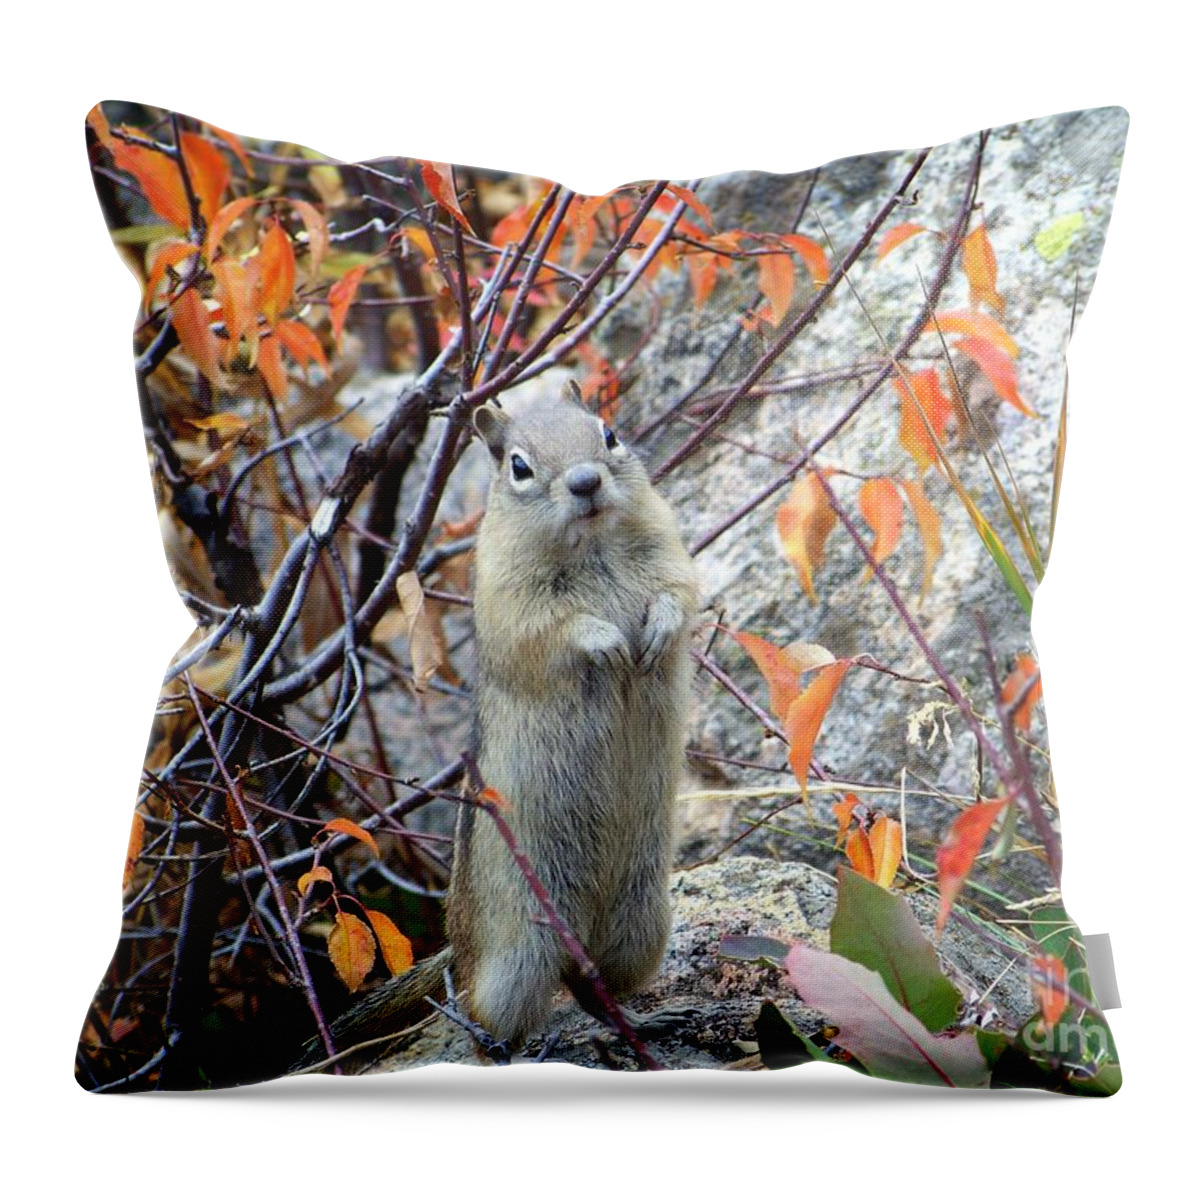 Ground Squirrel Throw Pillow featuring the photograph Hey There by Dorrene BrownButterfield